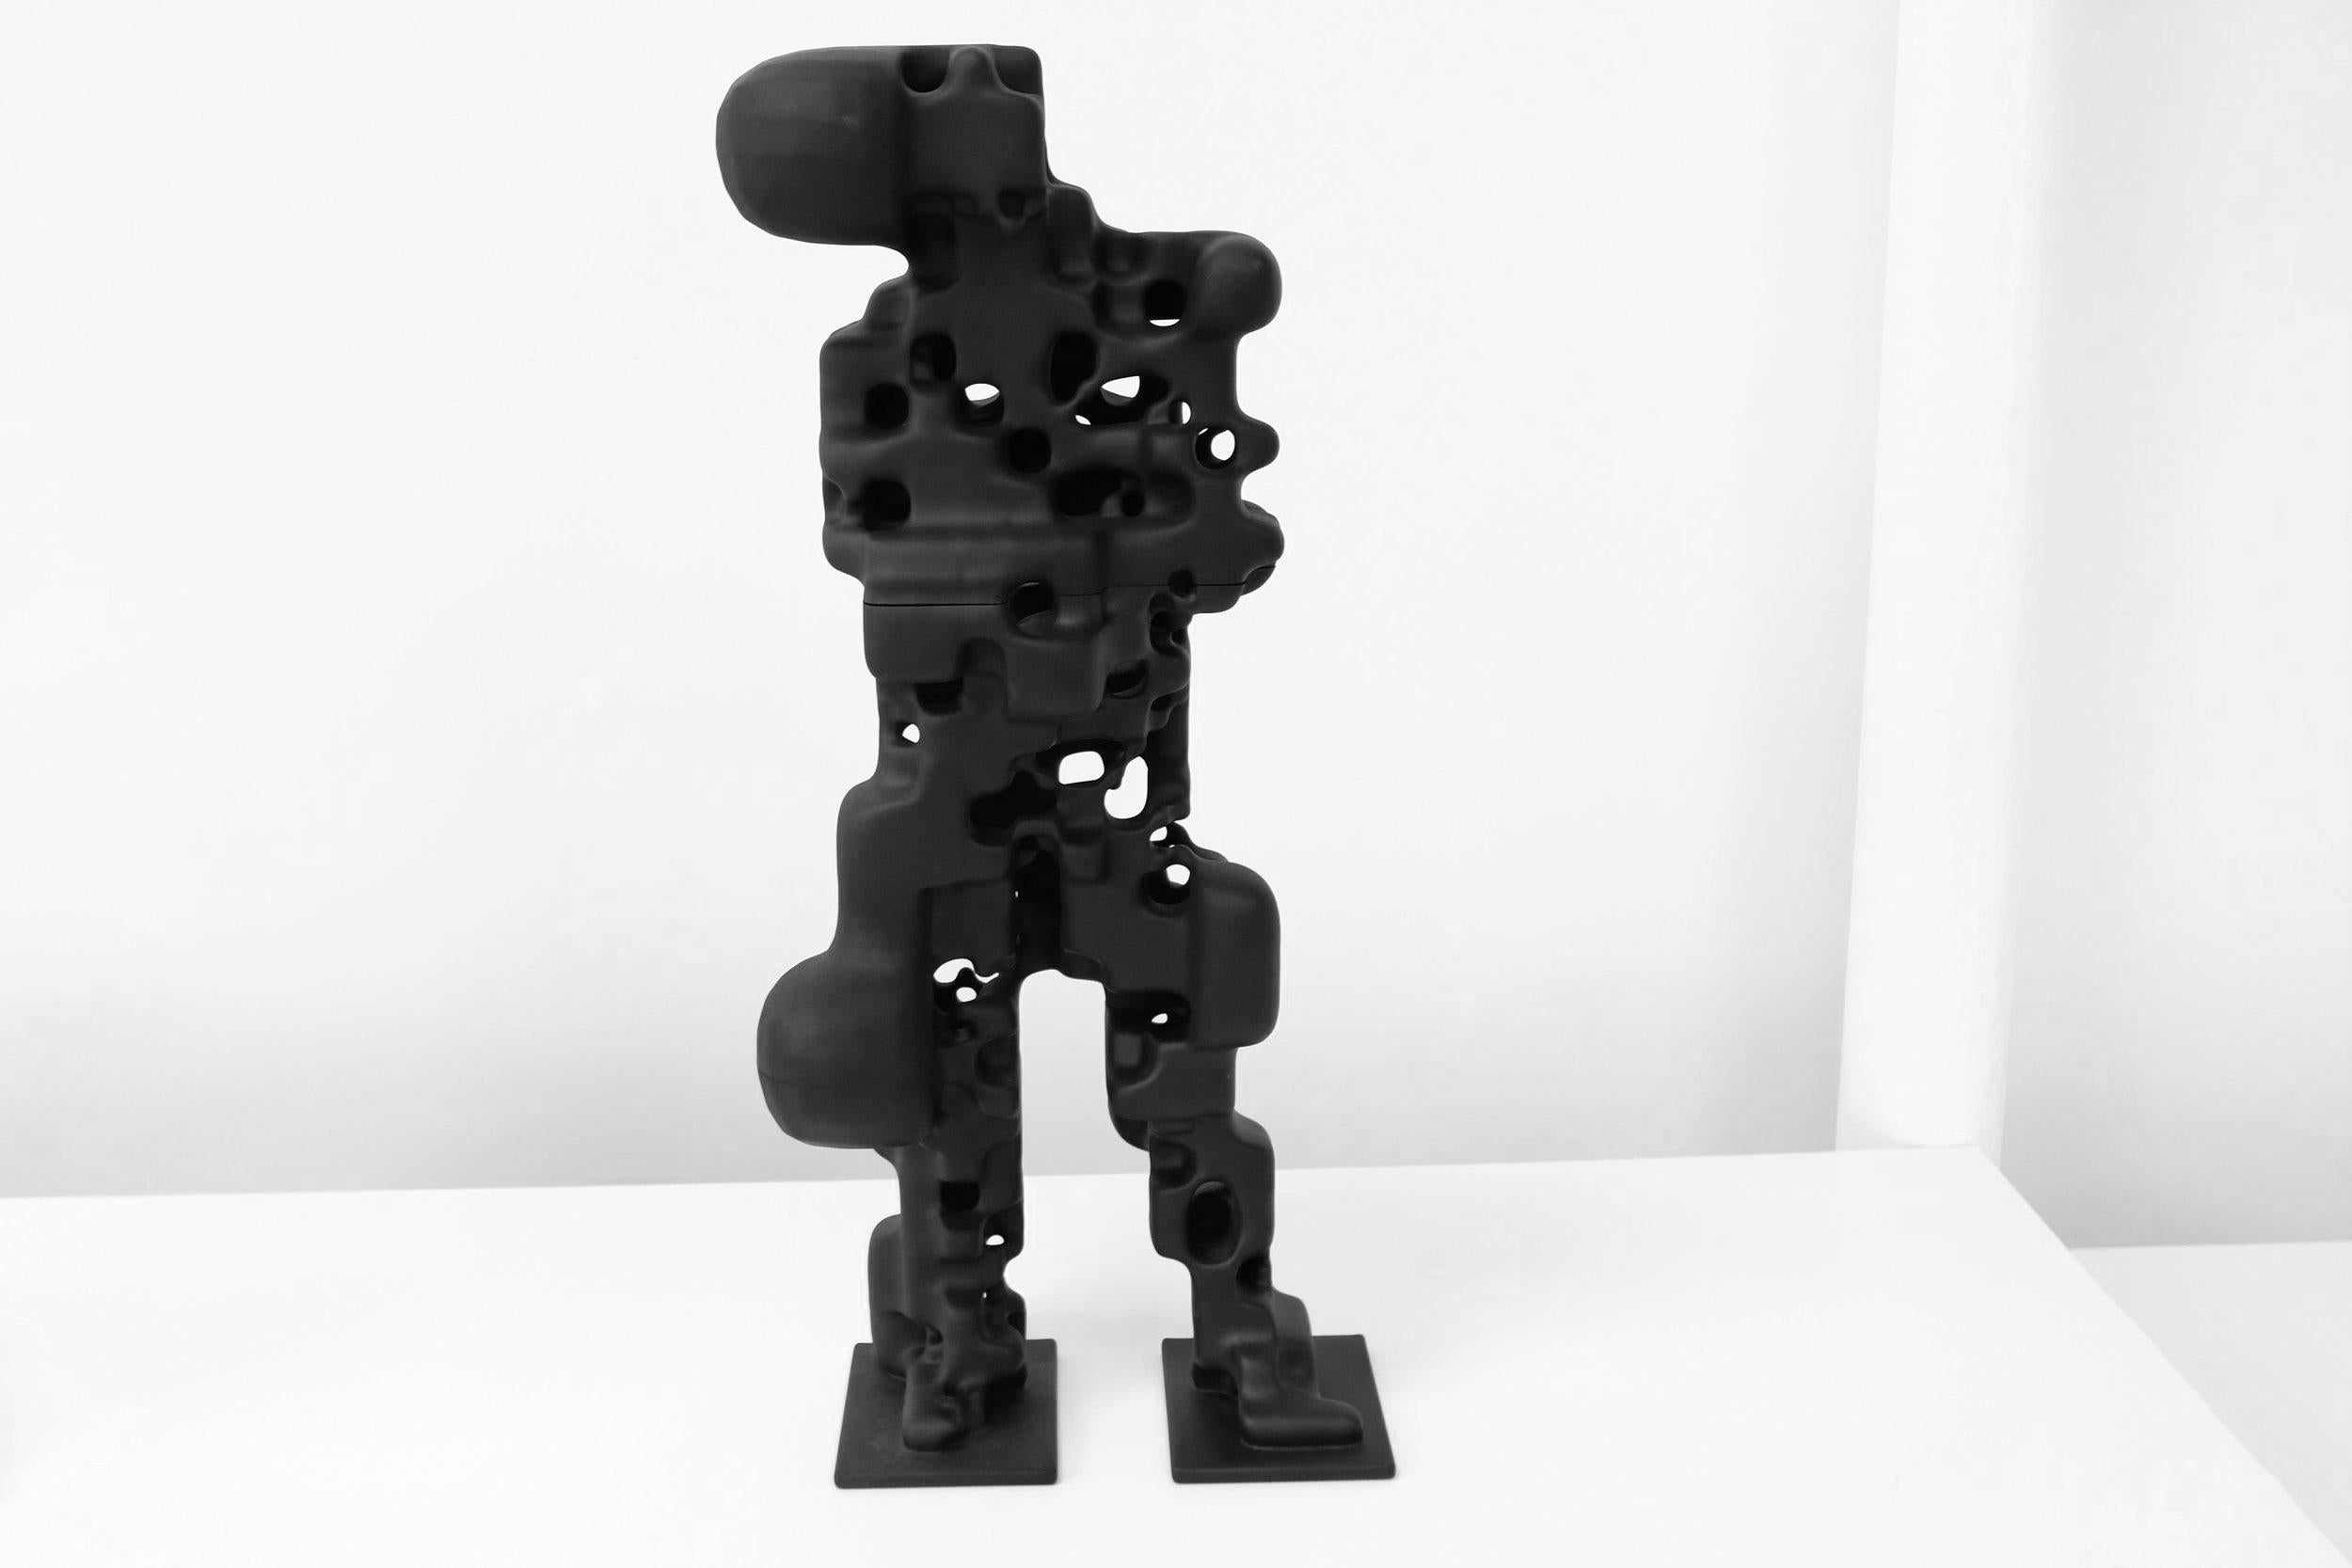 This humanoid sculpture was first created digitally by 3D canning a standing human subject through photogrammetry and then passing the scan through generative algorithms, after which it was fabricated with recycled Nylon PA 12 and MJF, or Multi-Jet